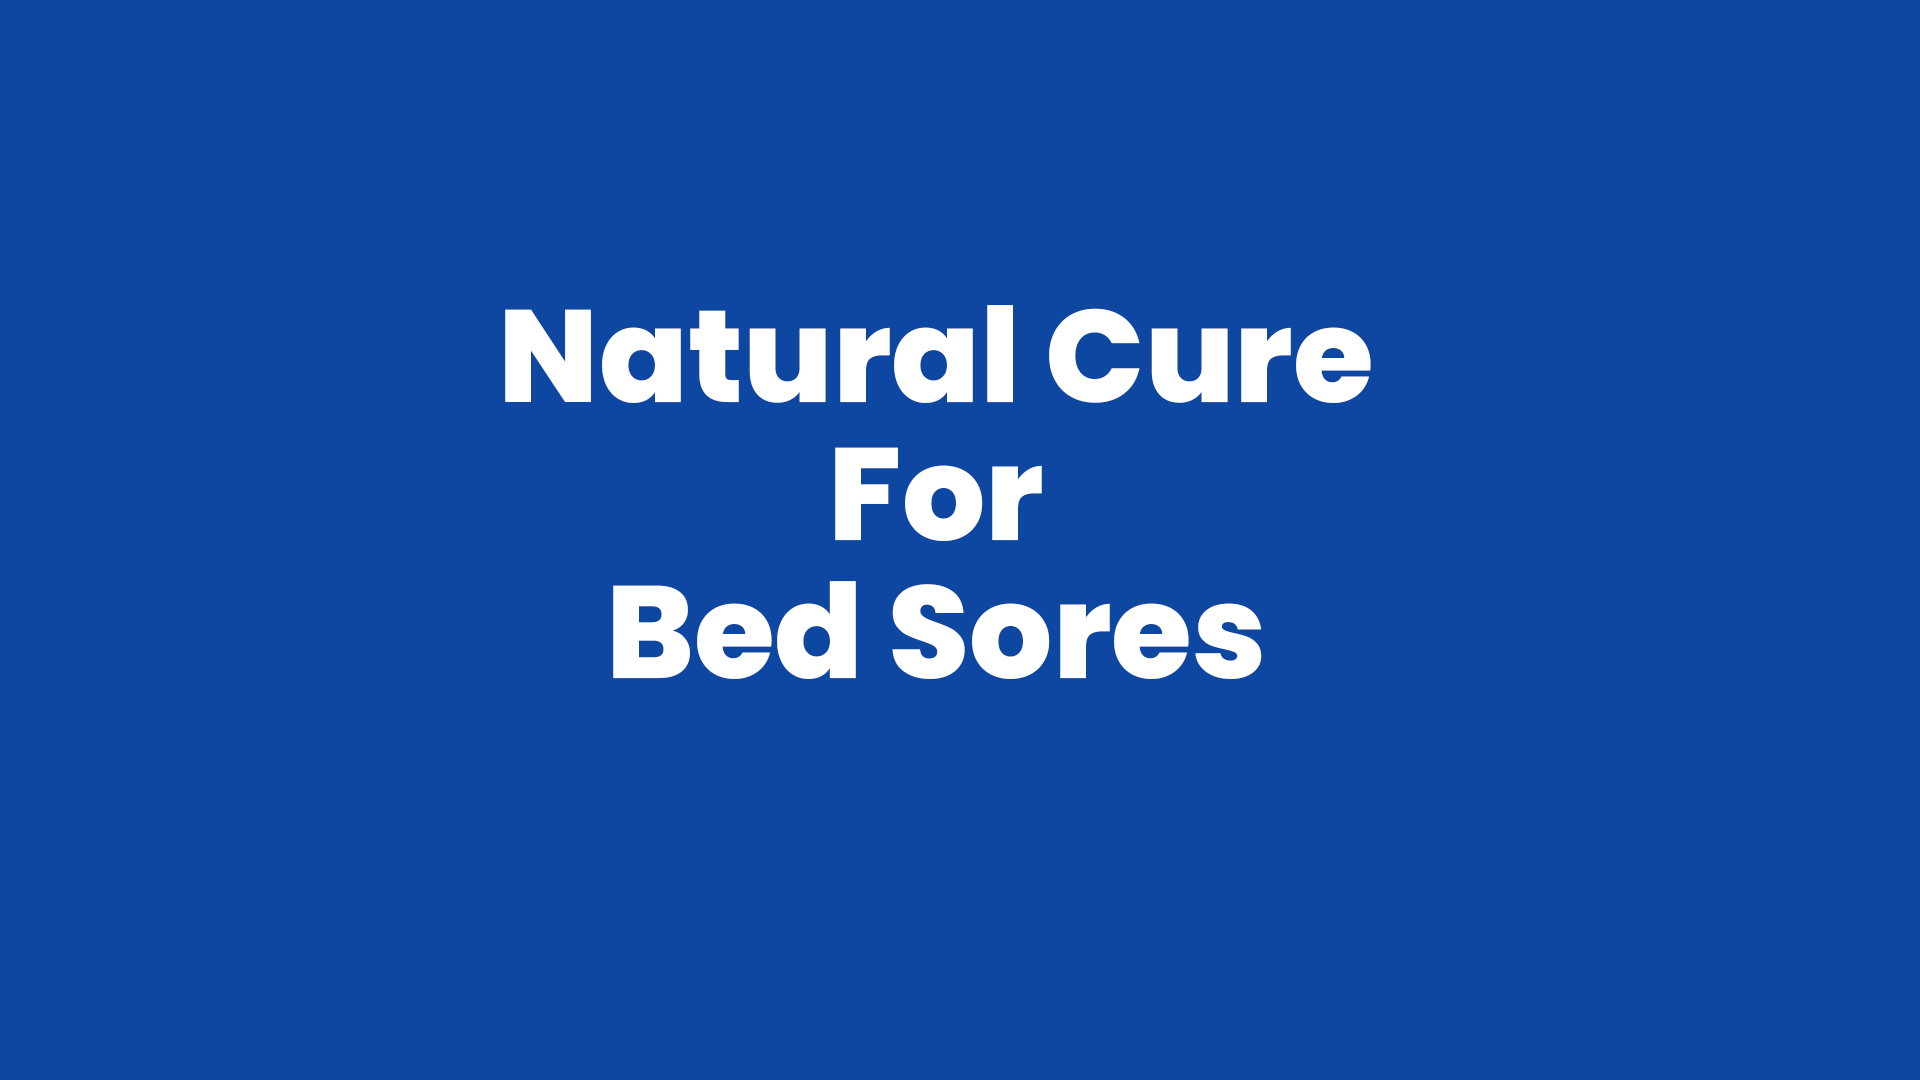 Natural Cure For Bed Sores